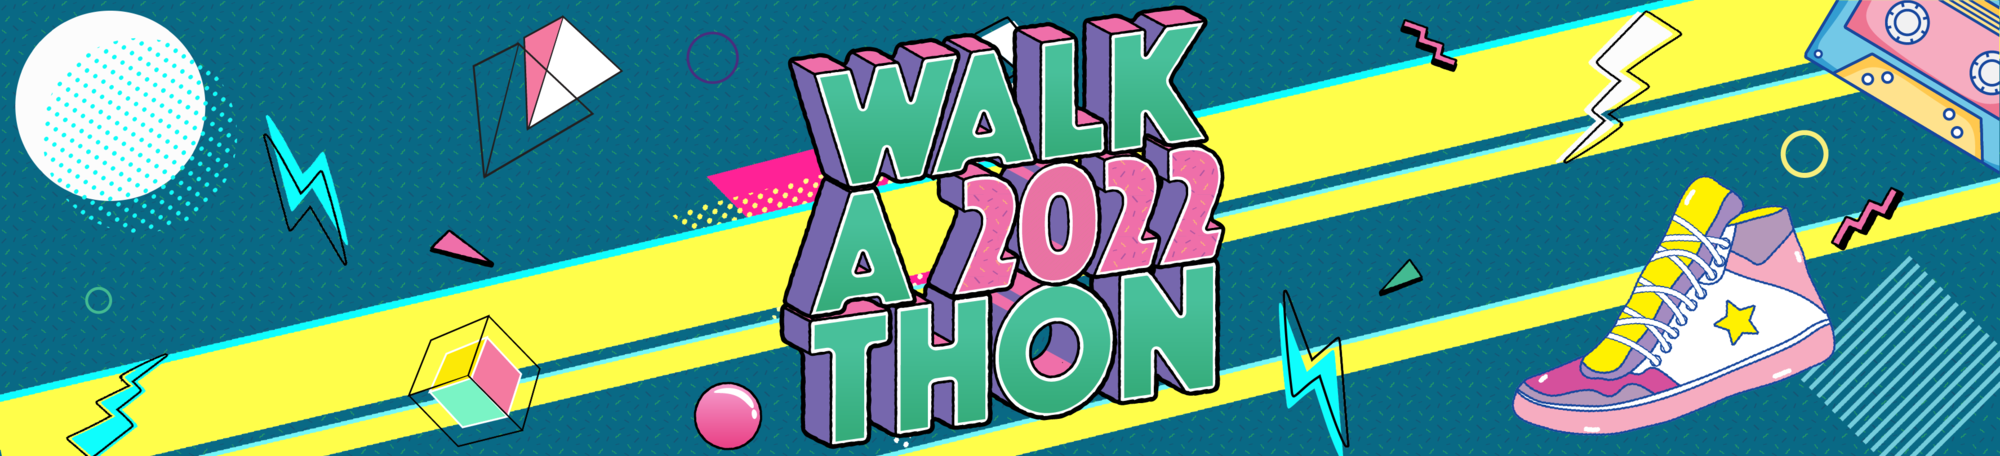 1990's visual design with Walk-a-thon title